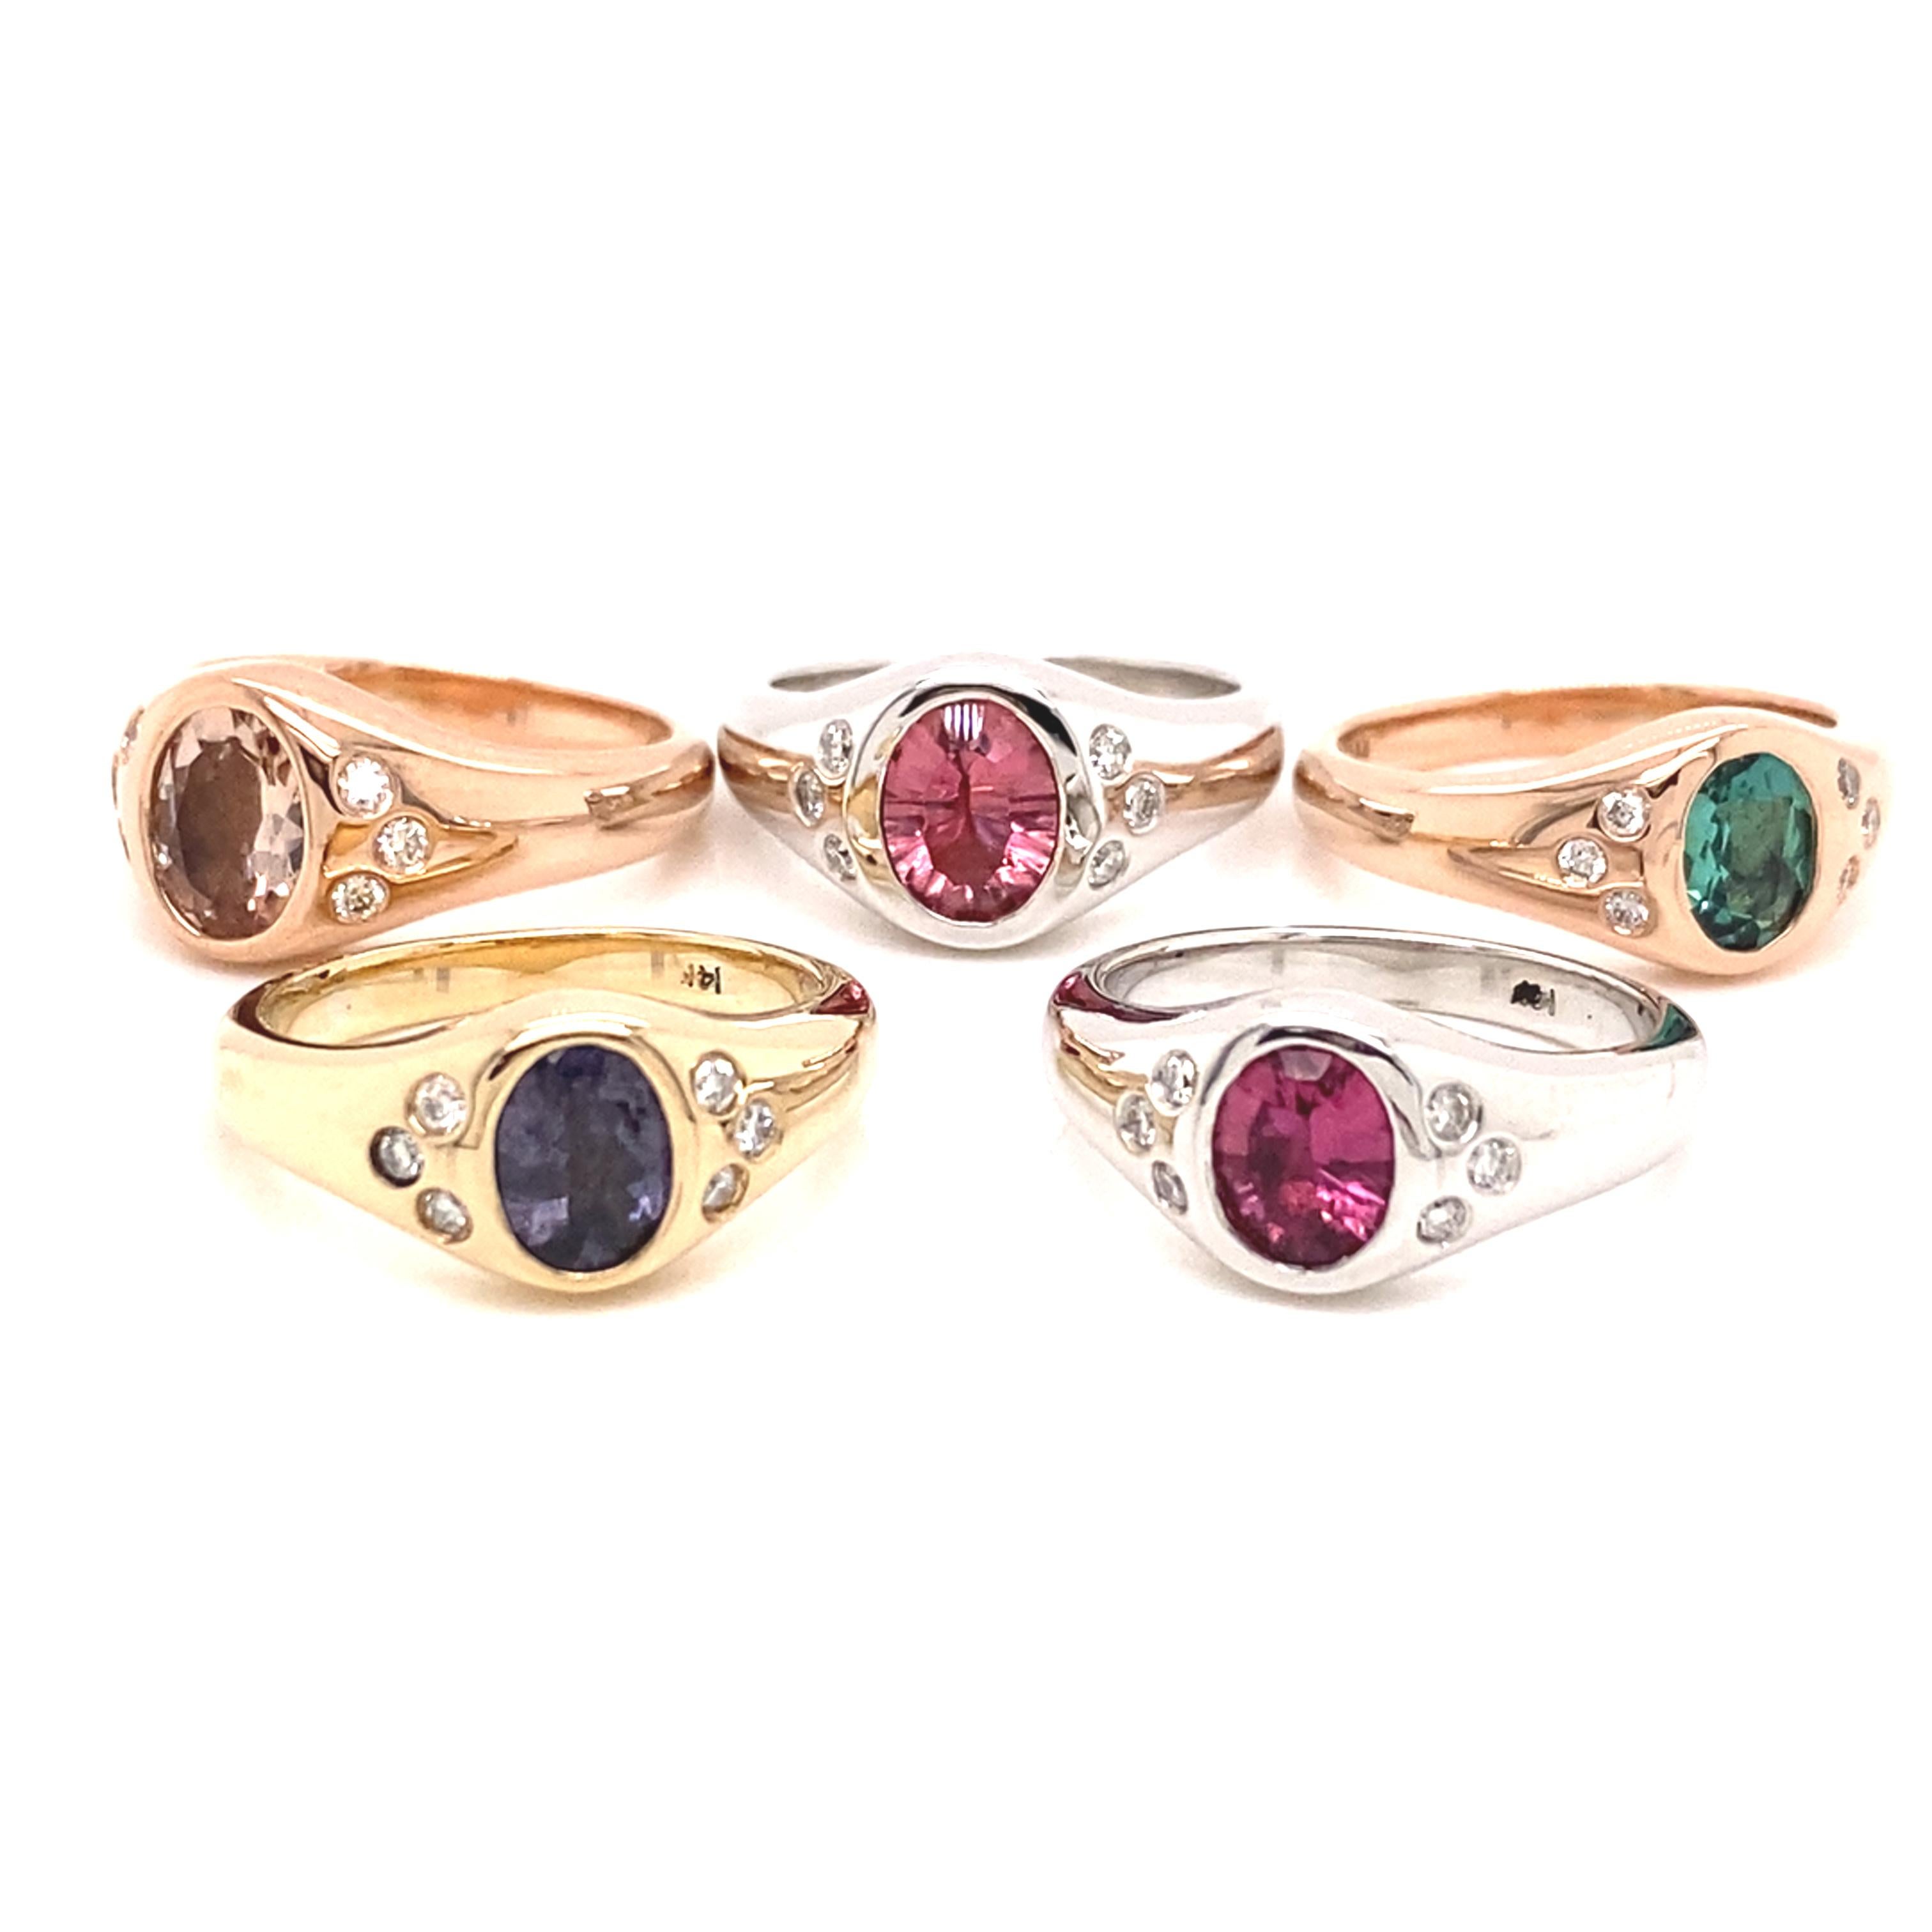 Women's 14k Yellow Gold Purple Spinel and Diamond Signet Pinky Ring